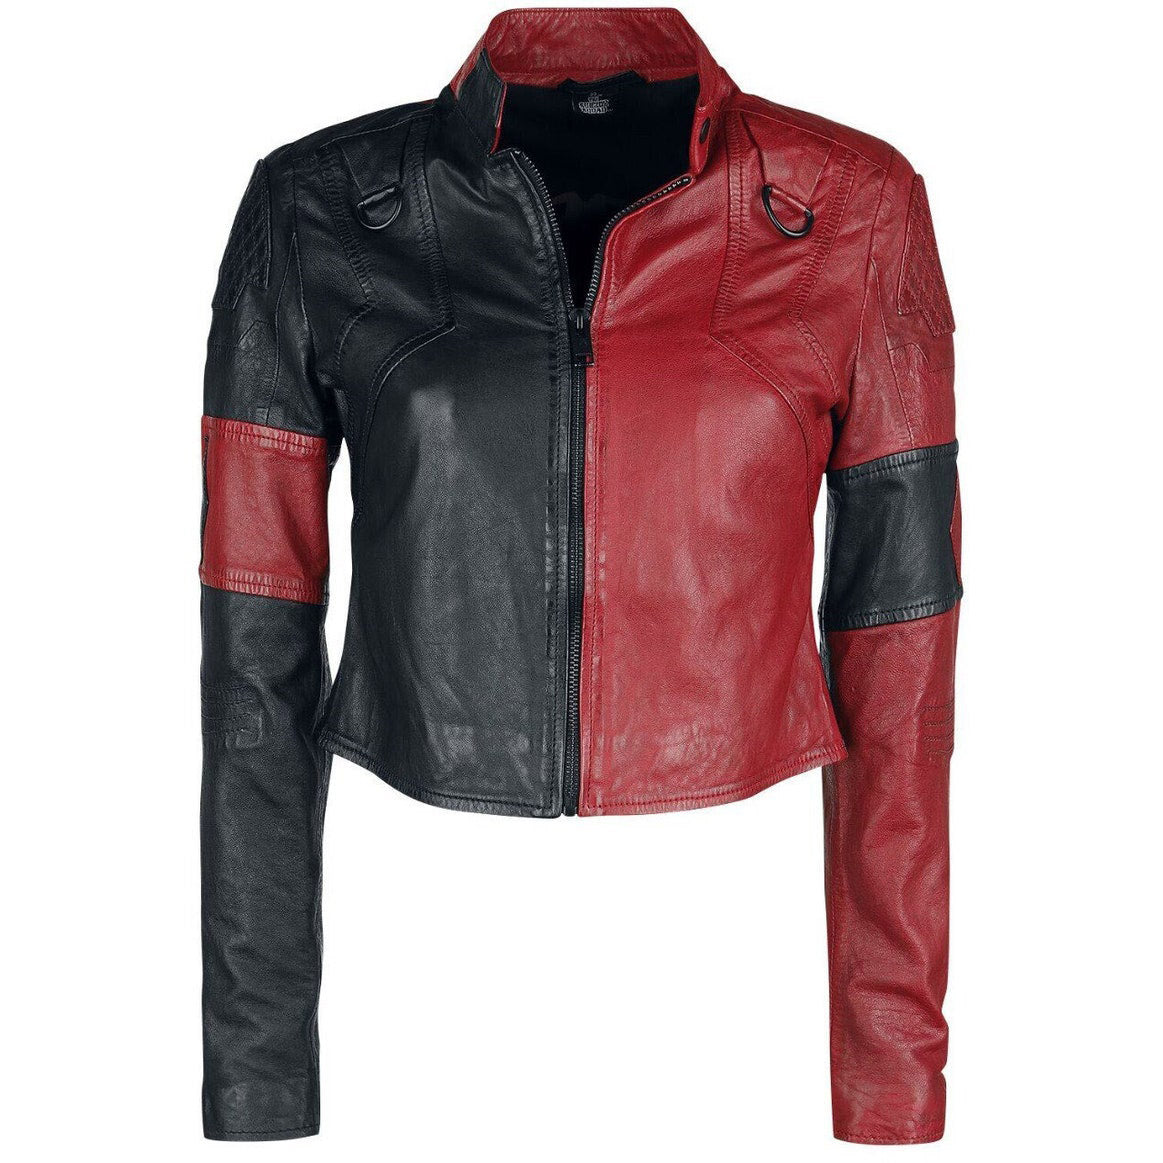 Harley Quinn Suicide Squad 2 Halloween Leather Jacket